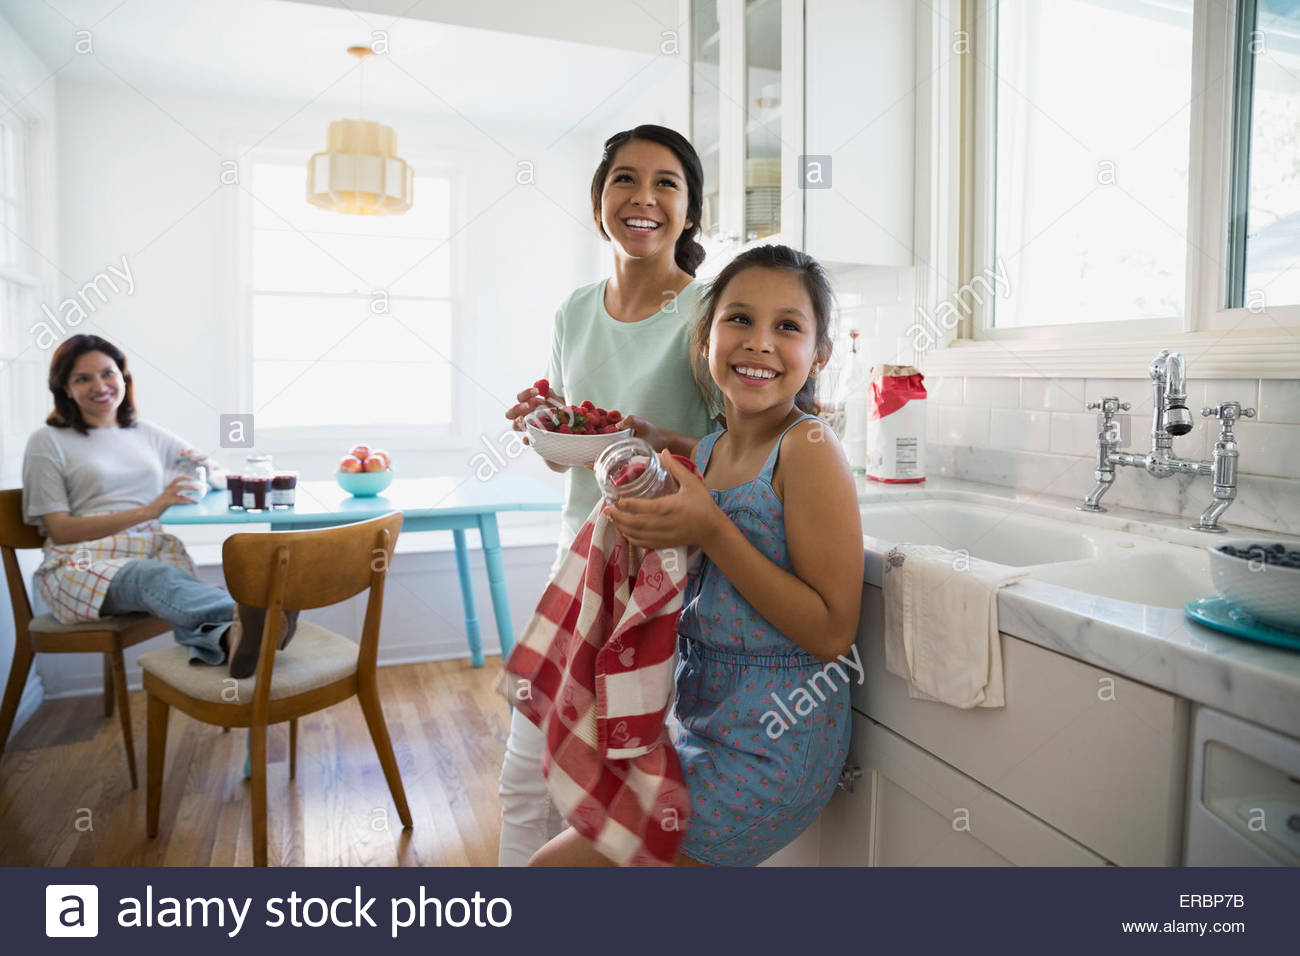 Smiling girls making jam with berries in kitchen Stock Photo